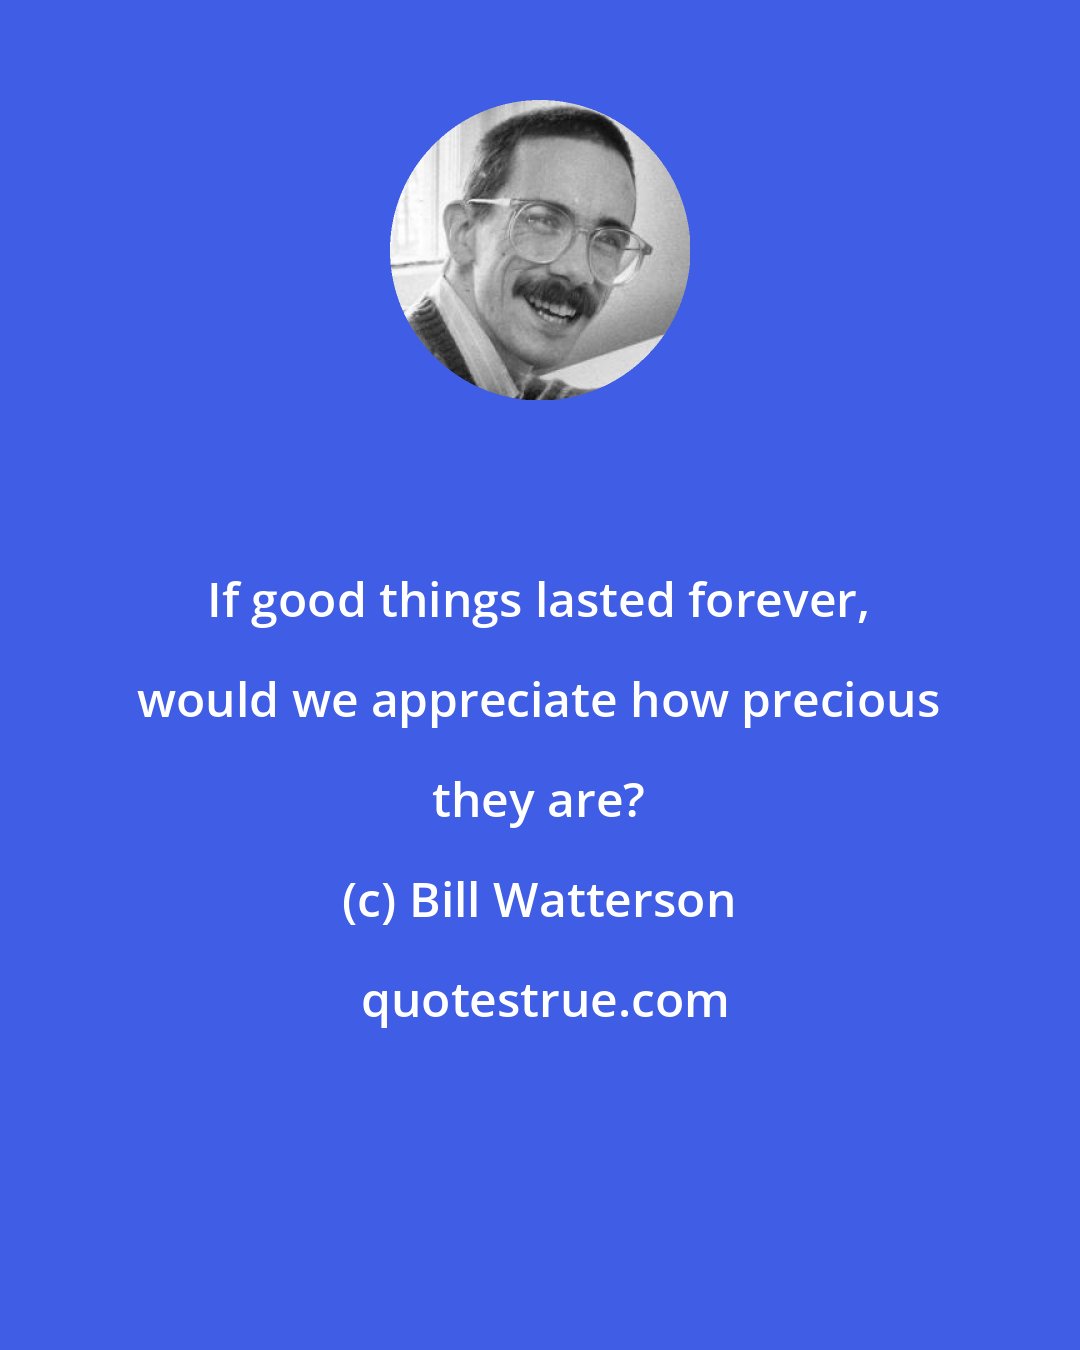 Bill Watterson: If good things lasted forever, would we appreciate how precious they are?